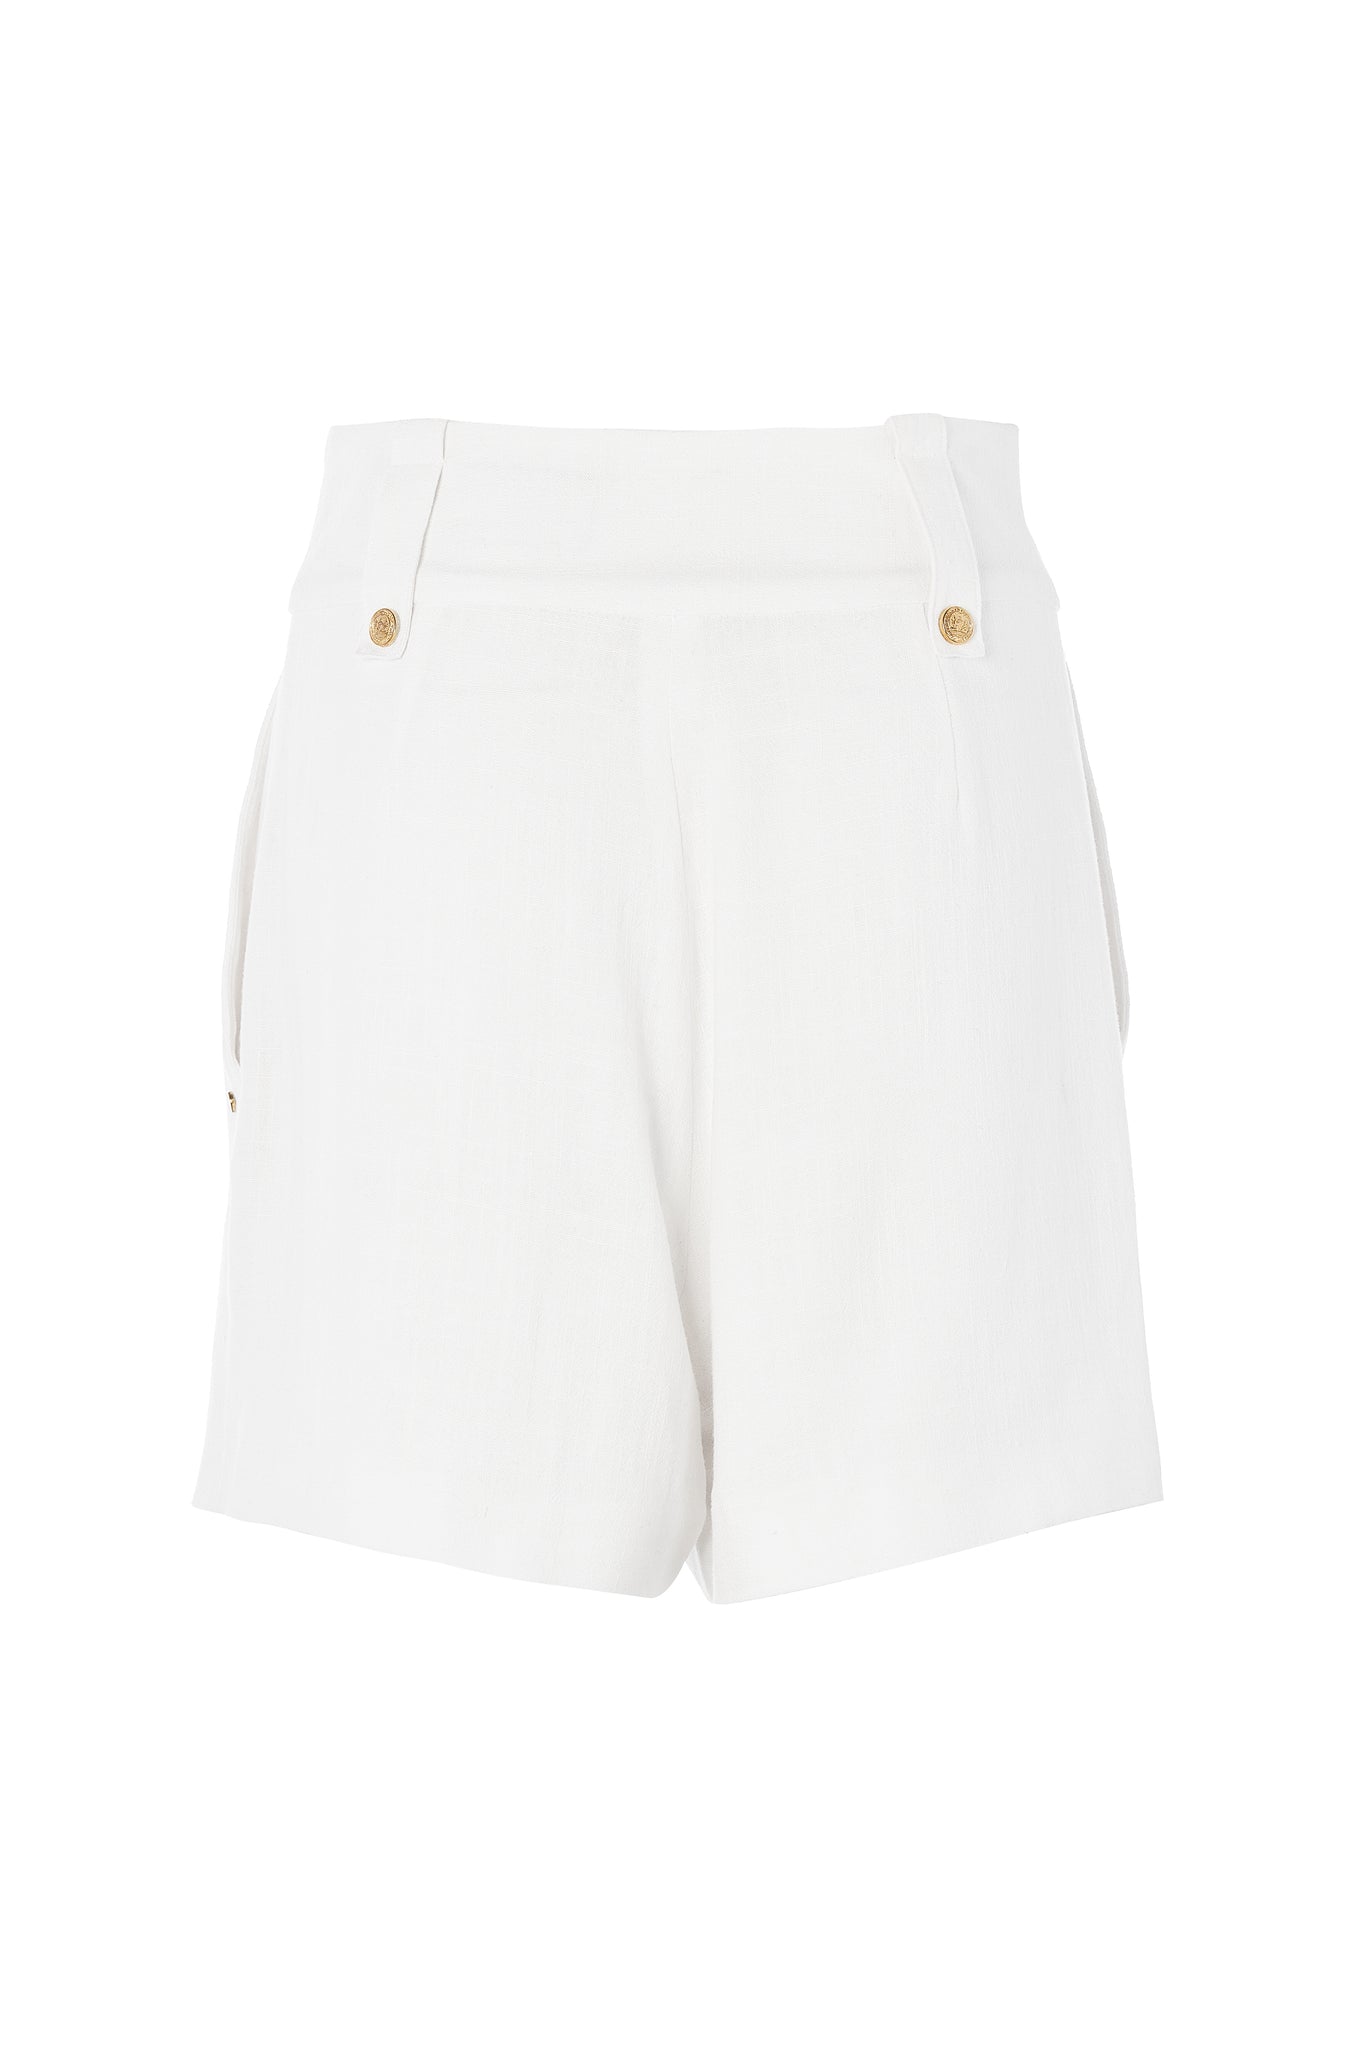 back of womens white linen tailored shorts with two single knife pleats and centre front zip fly fastening with two gold stud buttons